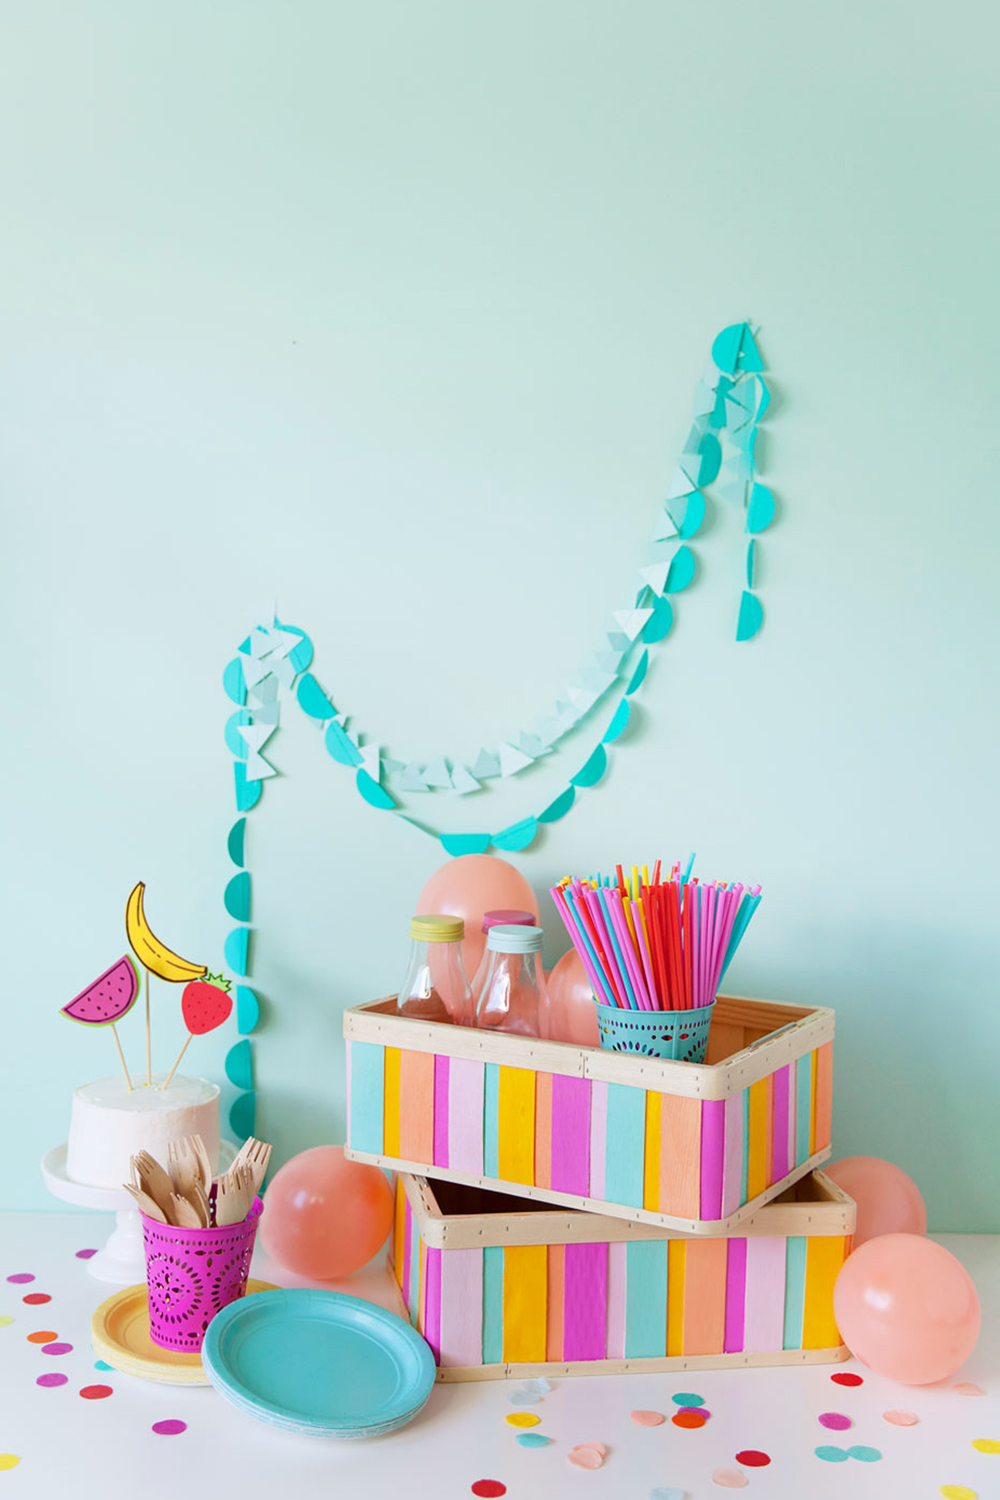 These painted wood boxes are a fun IKEA hack and only take 10 minutes to make. Perfect for storage, organizing your supplies or cute party decor.